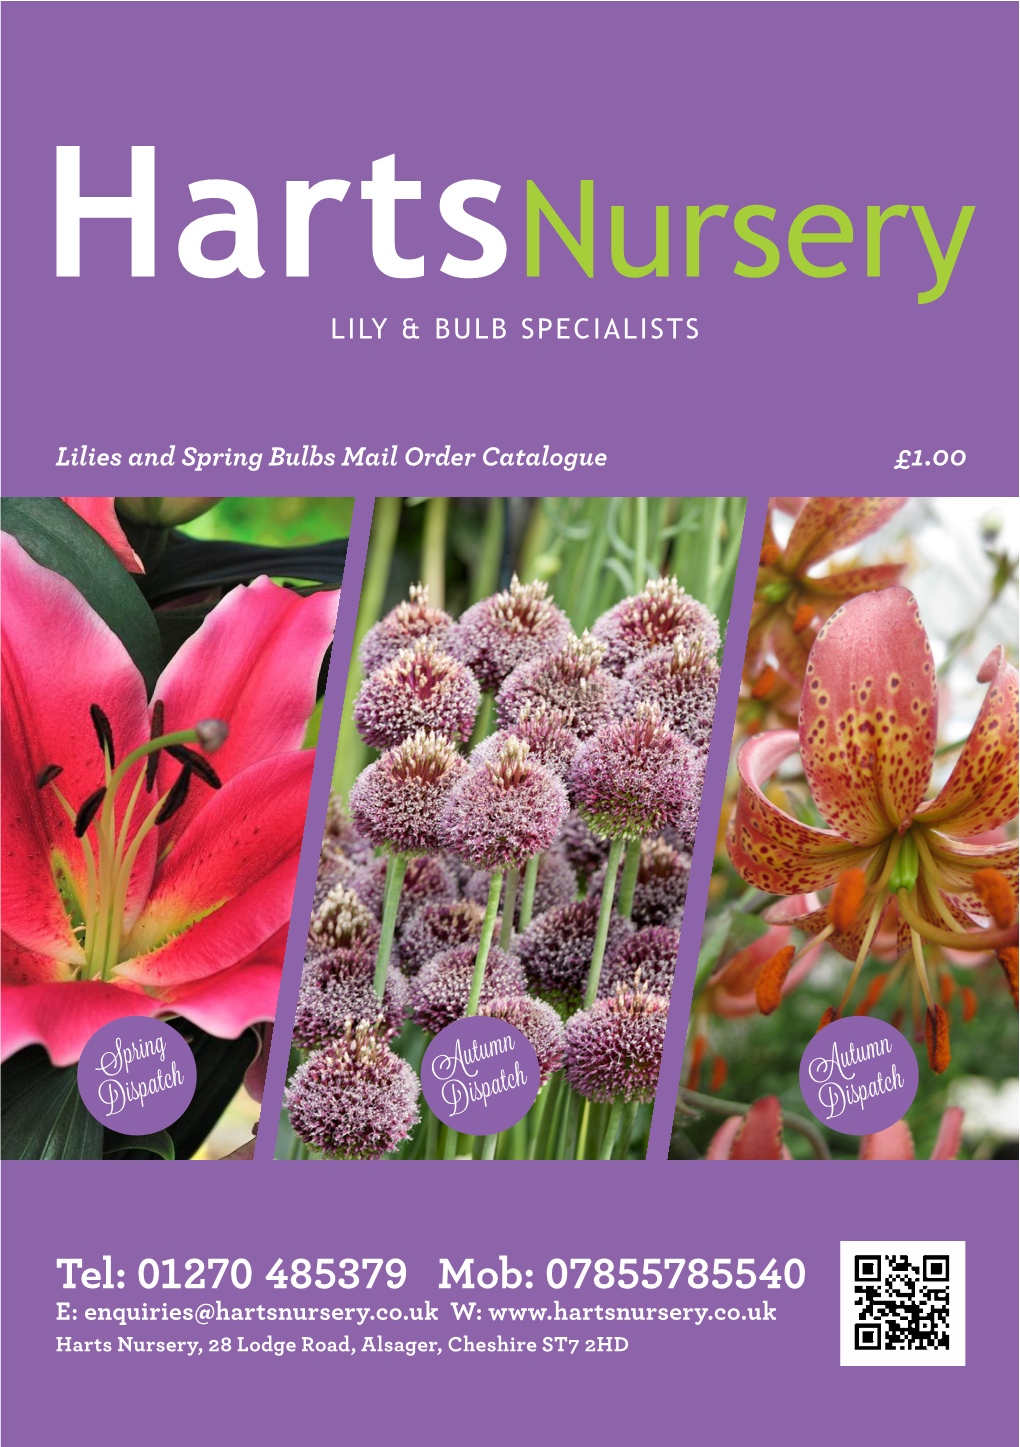 Harts Nursery, 28 Lodge Road, Alsager, Cheshire ST7 2HD Contents